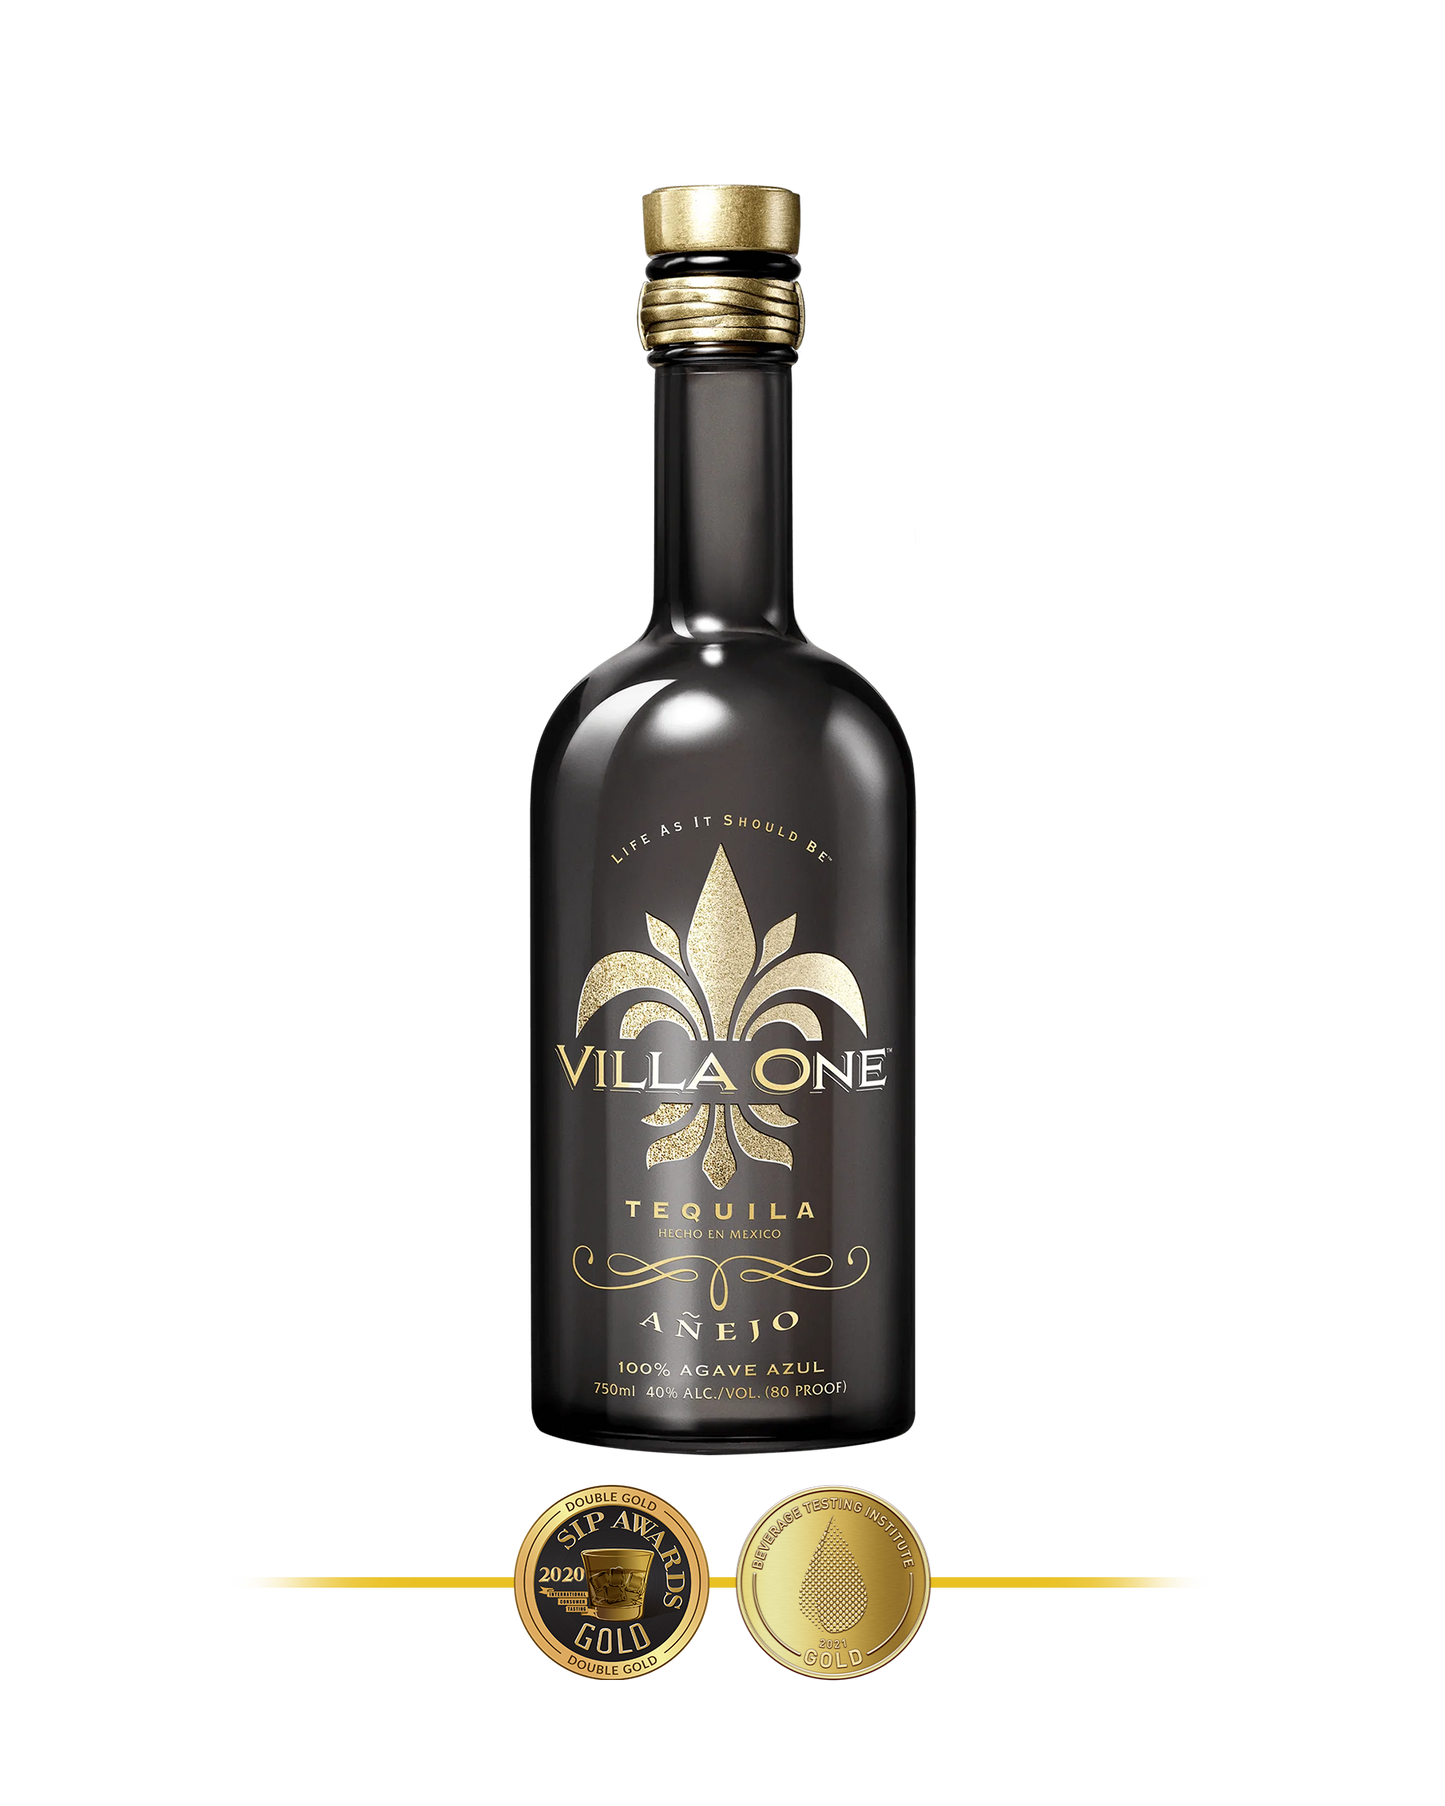 Villa One Tequila Añejo, winner of the SIP Awards Double-Gold and the BTI Award Gold